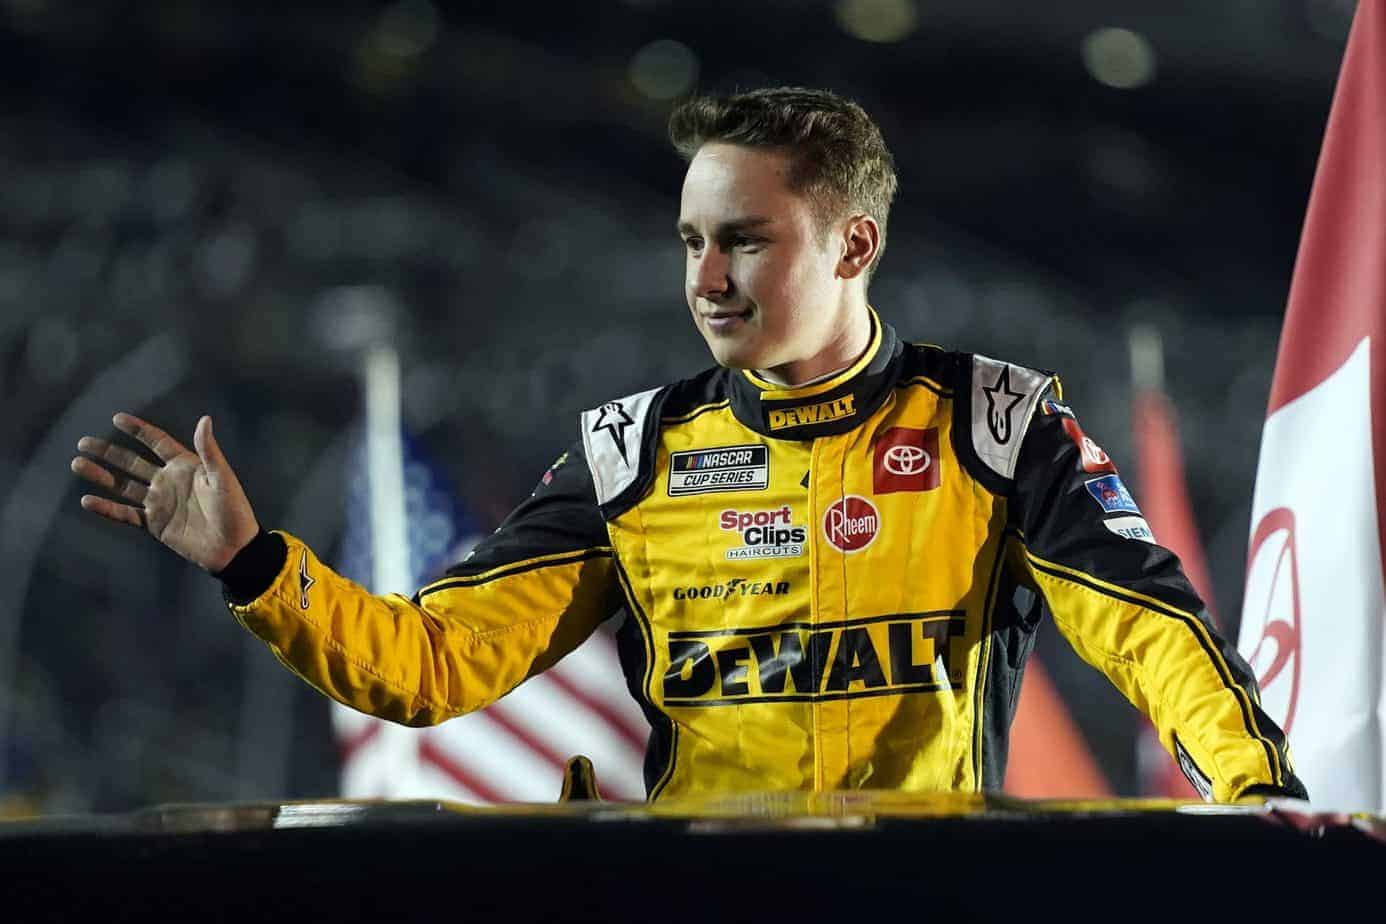 Let's dive into our NASCAR DFS picks to identify the top drivers for the Wurth 400 at Dover in this pre-projections run...